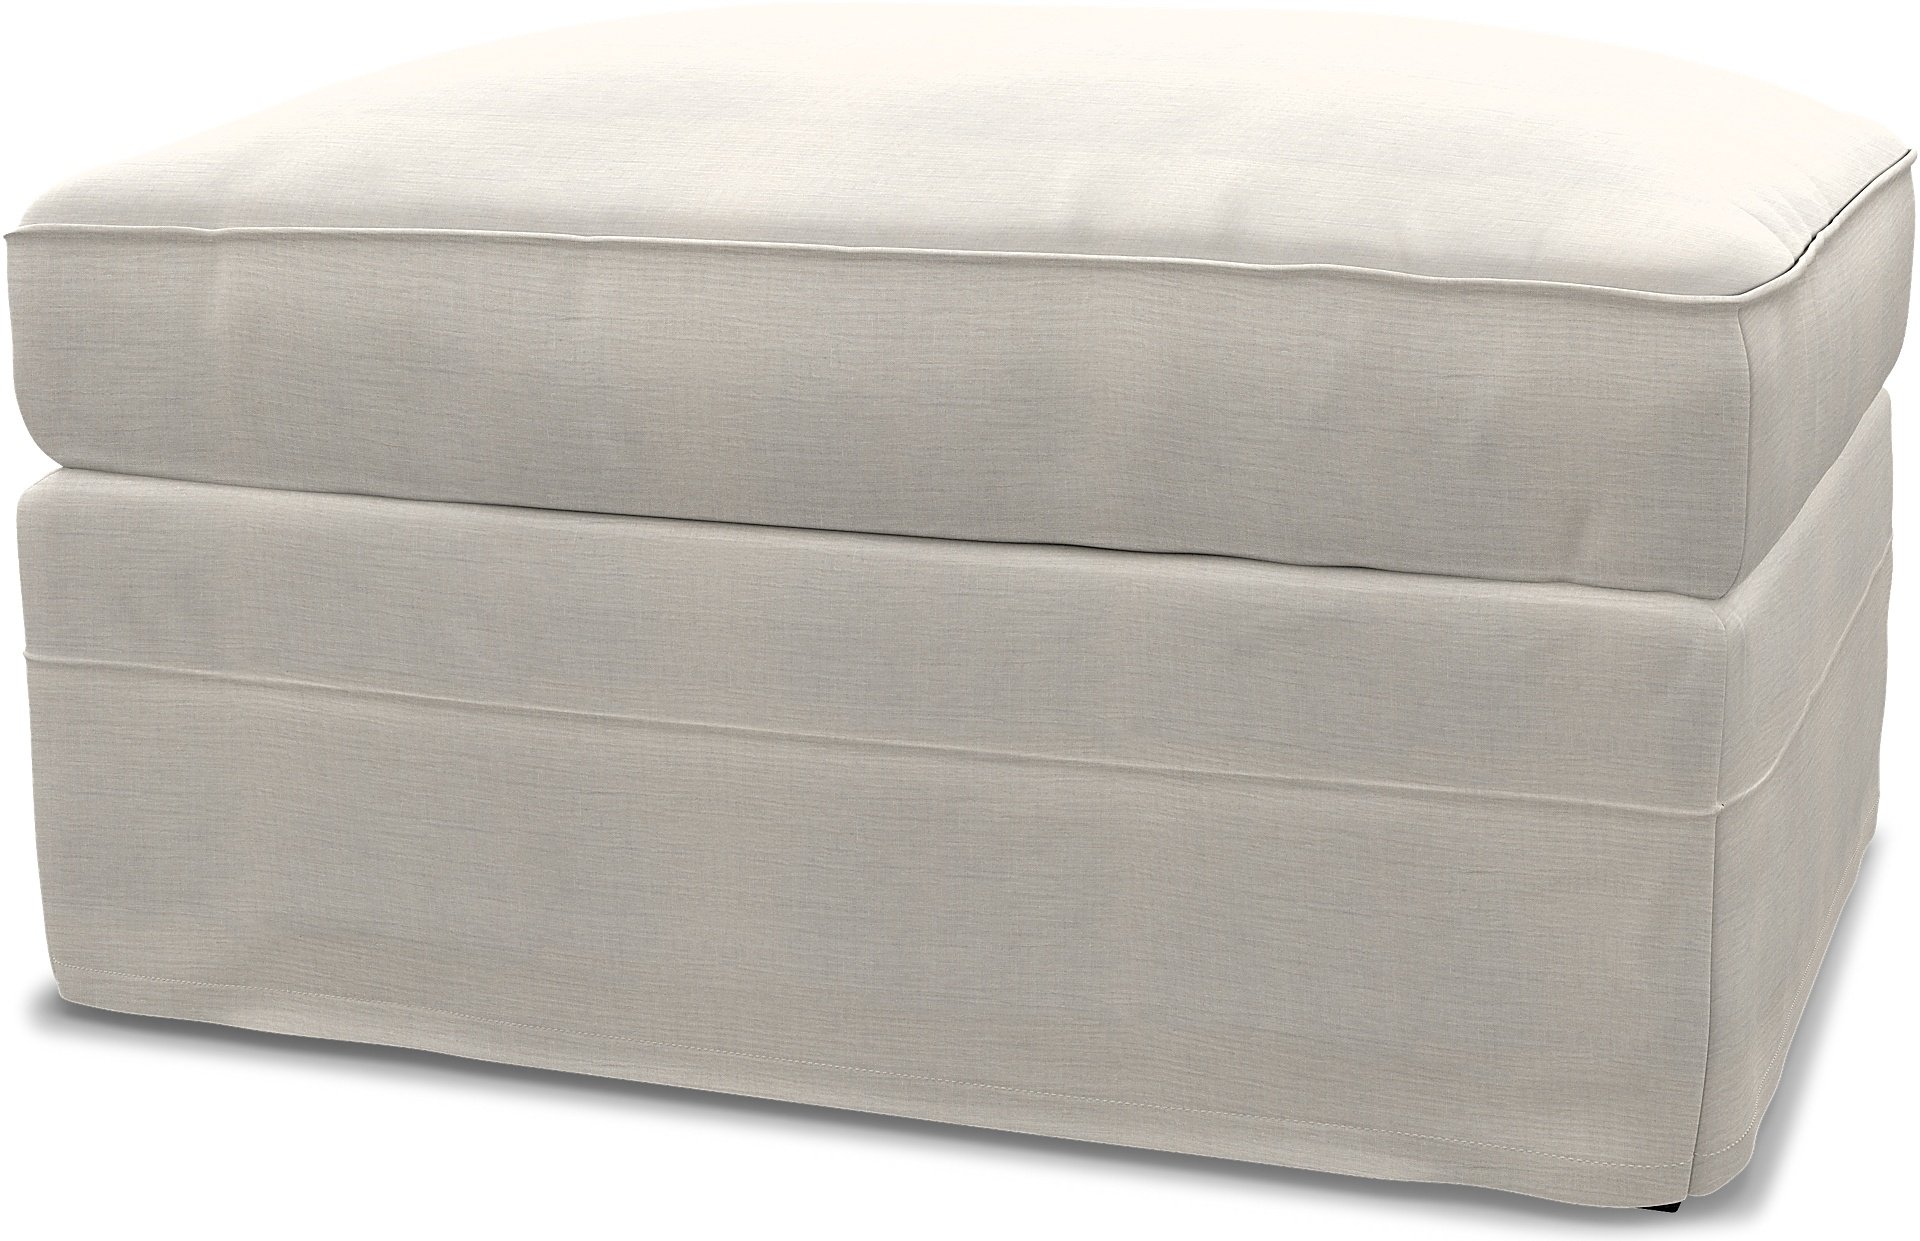 IKEA - Gronlid Footstool with Storage Cover, Soft White, Linen - Bemz